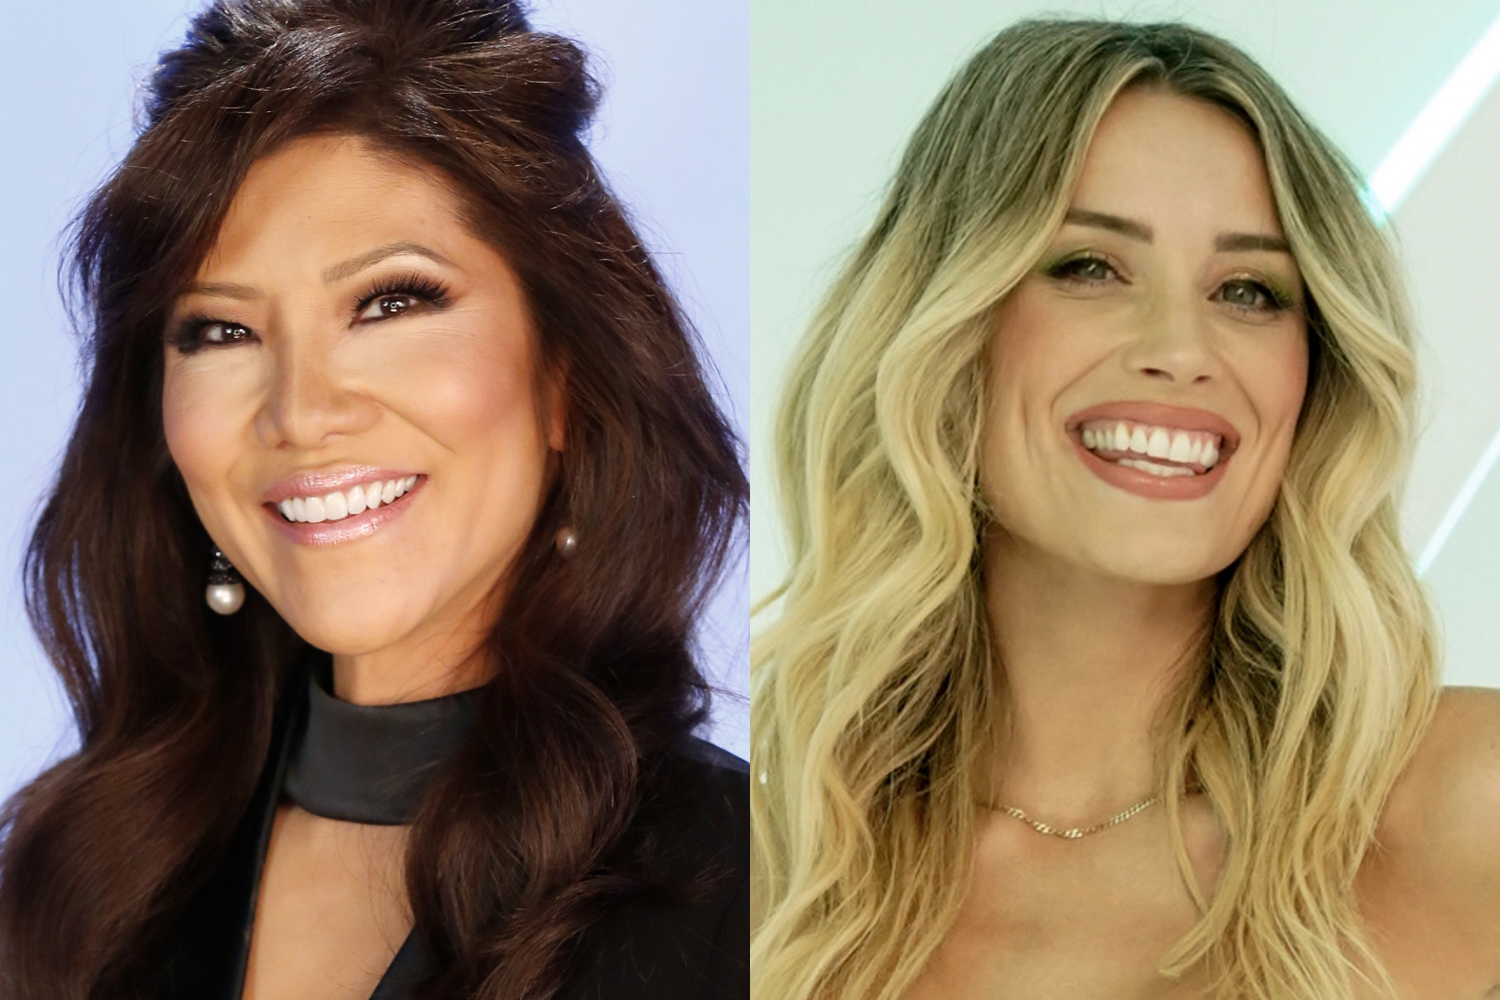 Julie Chen, host of 'Big Brother,' and Arielle Vandenberg, host of 'Love Island'